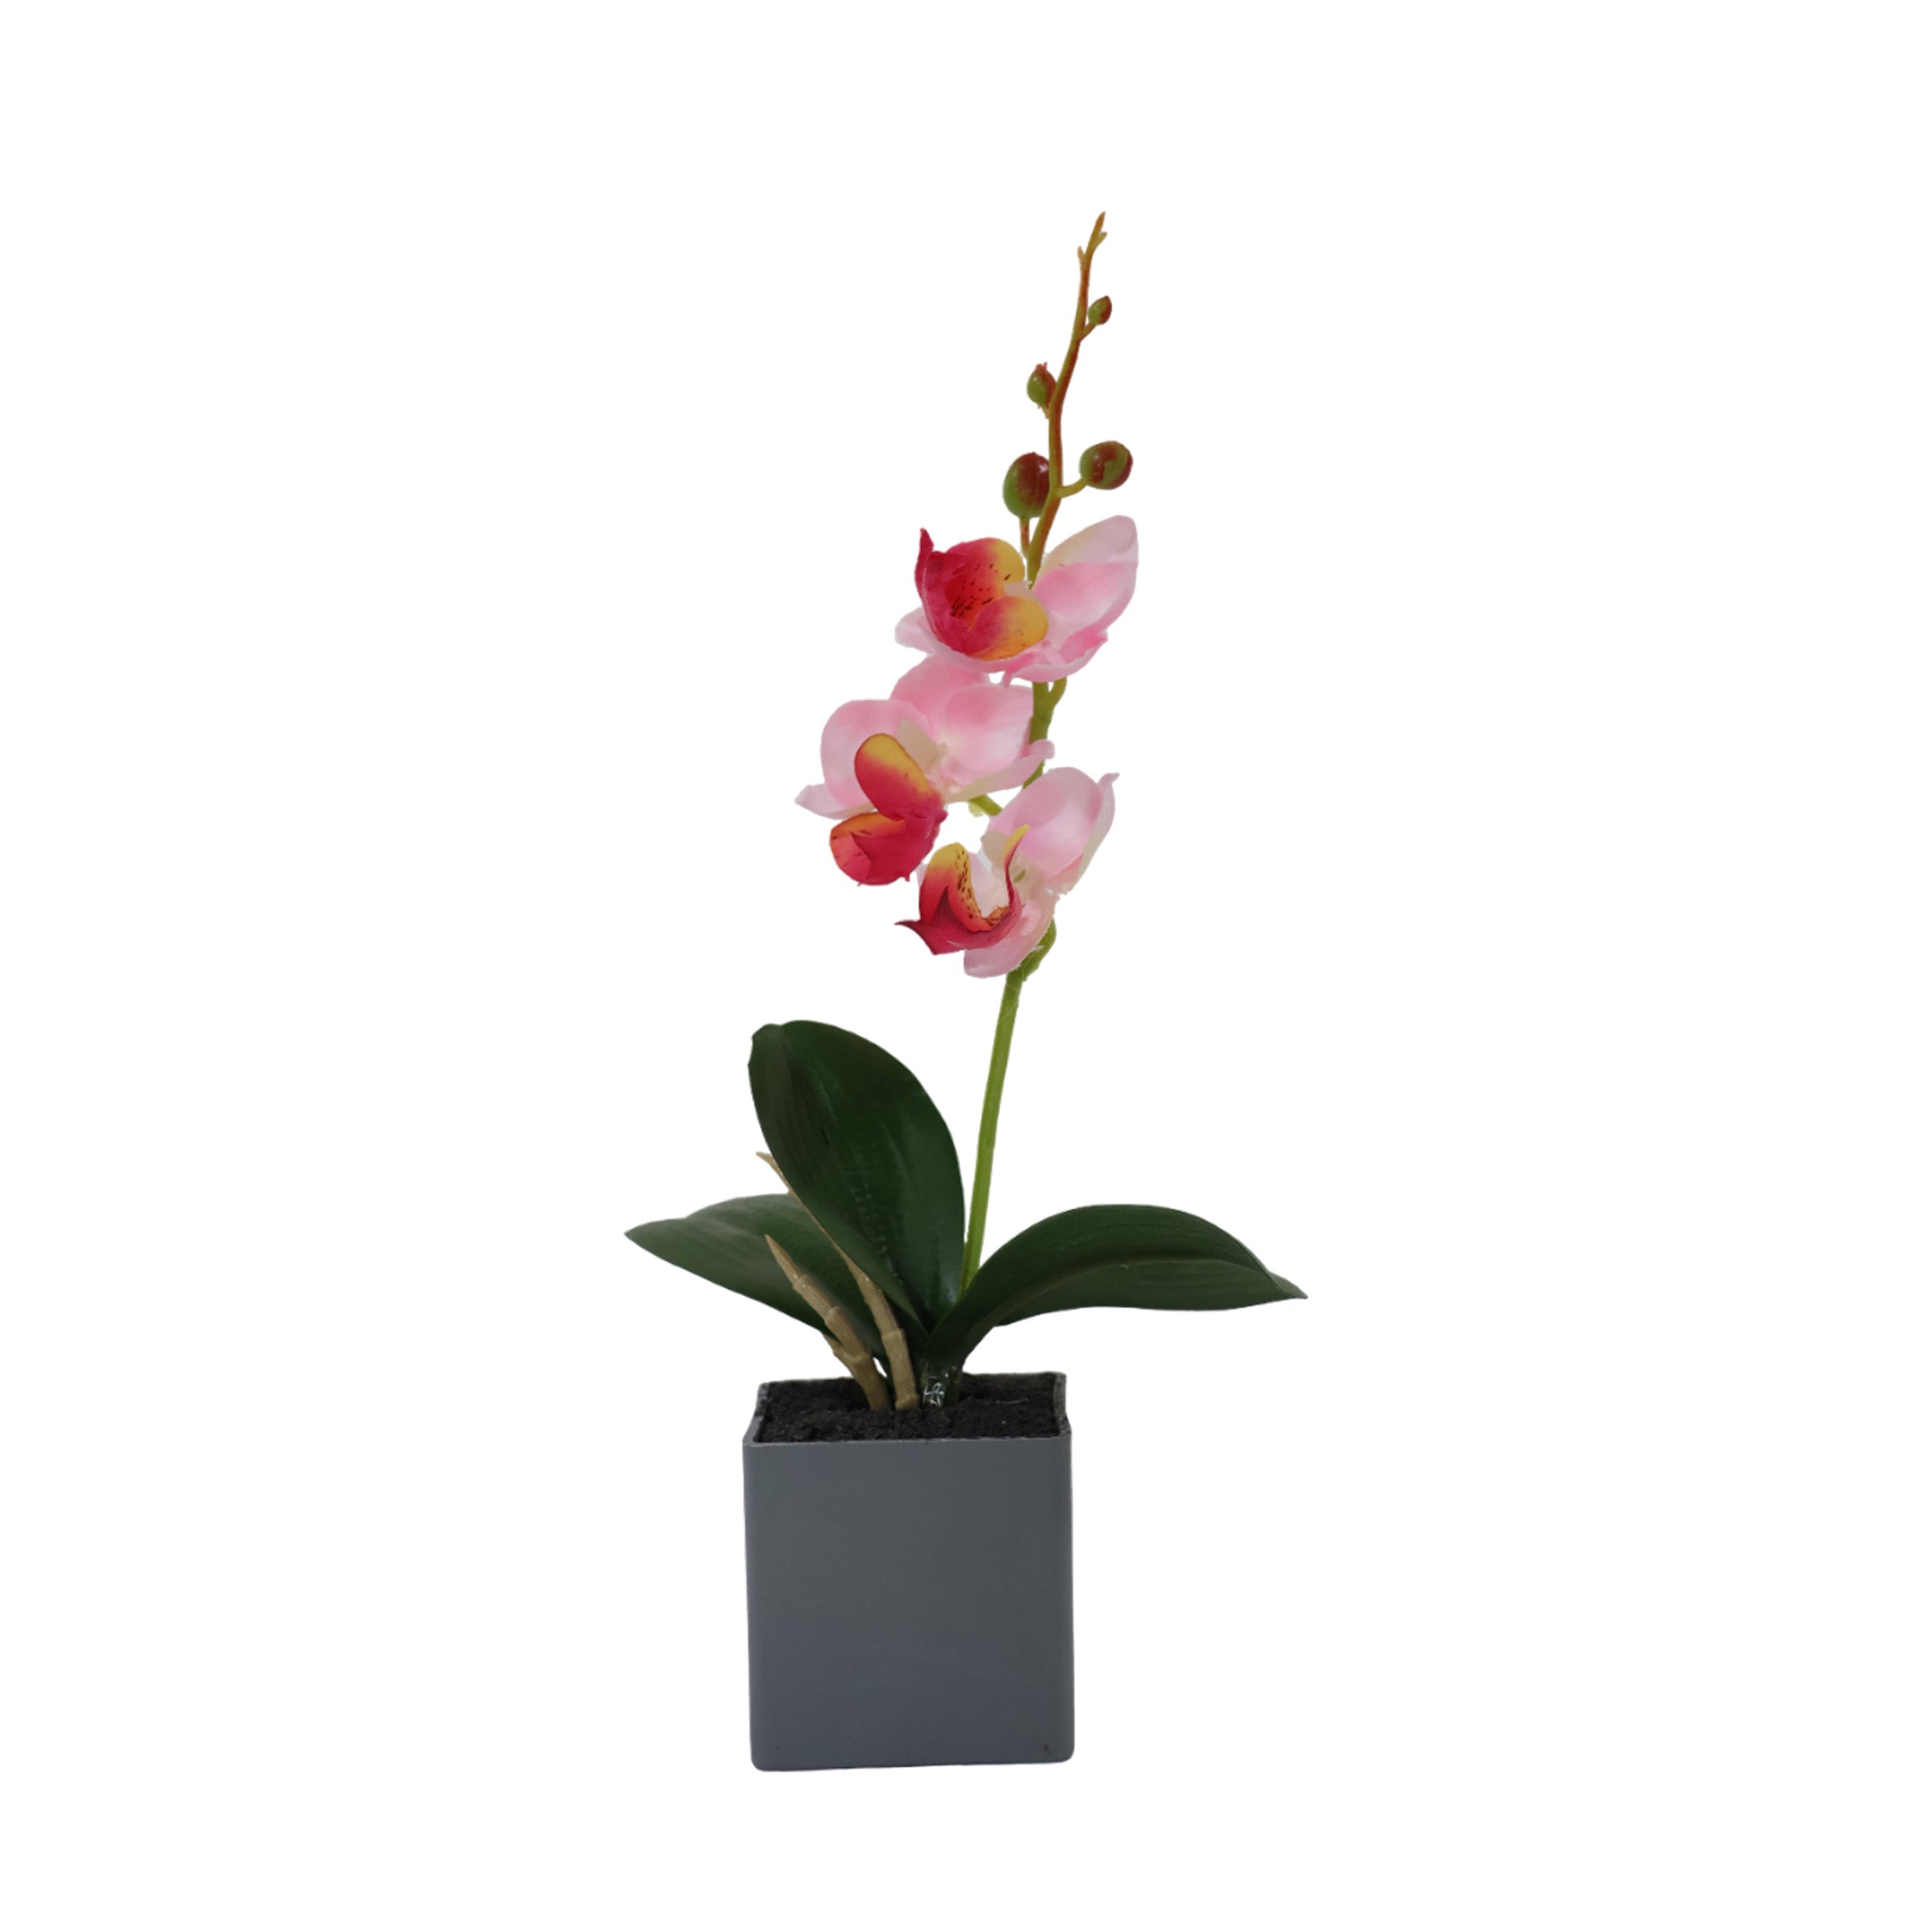 Aavana greens Artificial Bonsai Plant, Orchid Artificial Flowers Plant, Artificial Decorative Plant Home Office Indoor and Outdoor Decoration